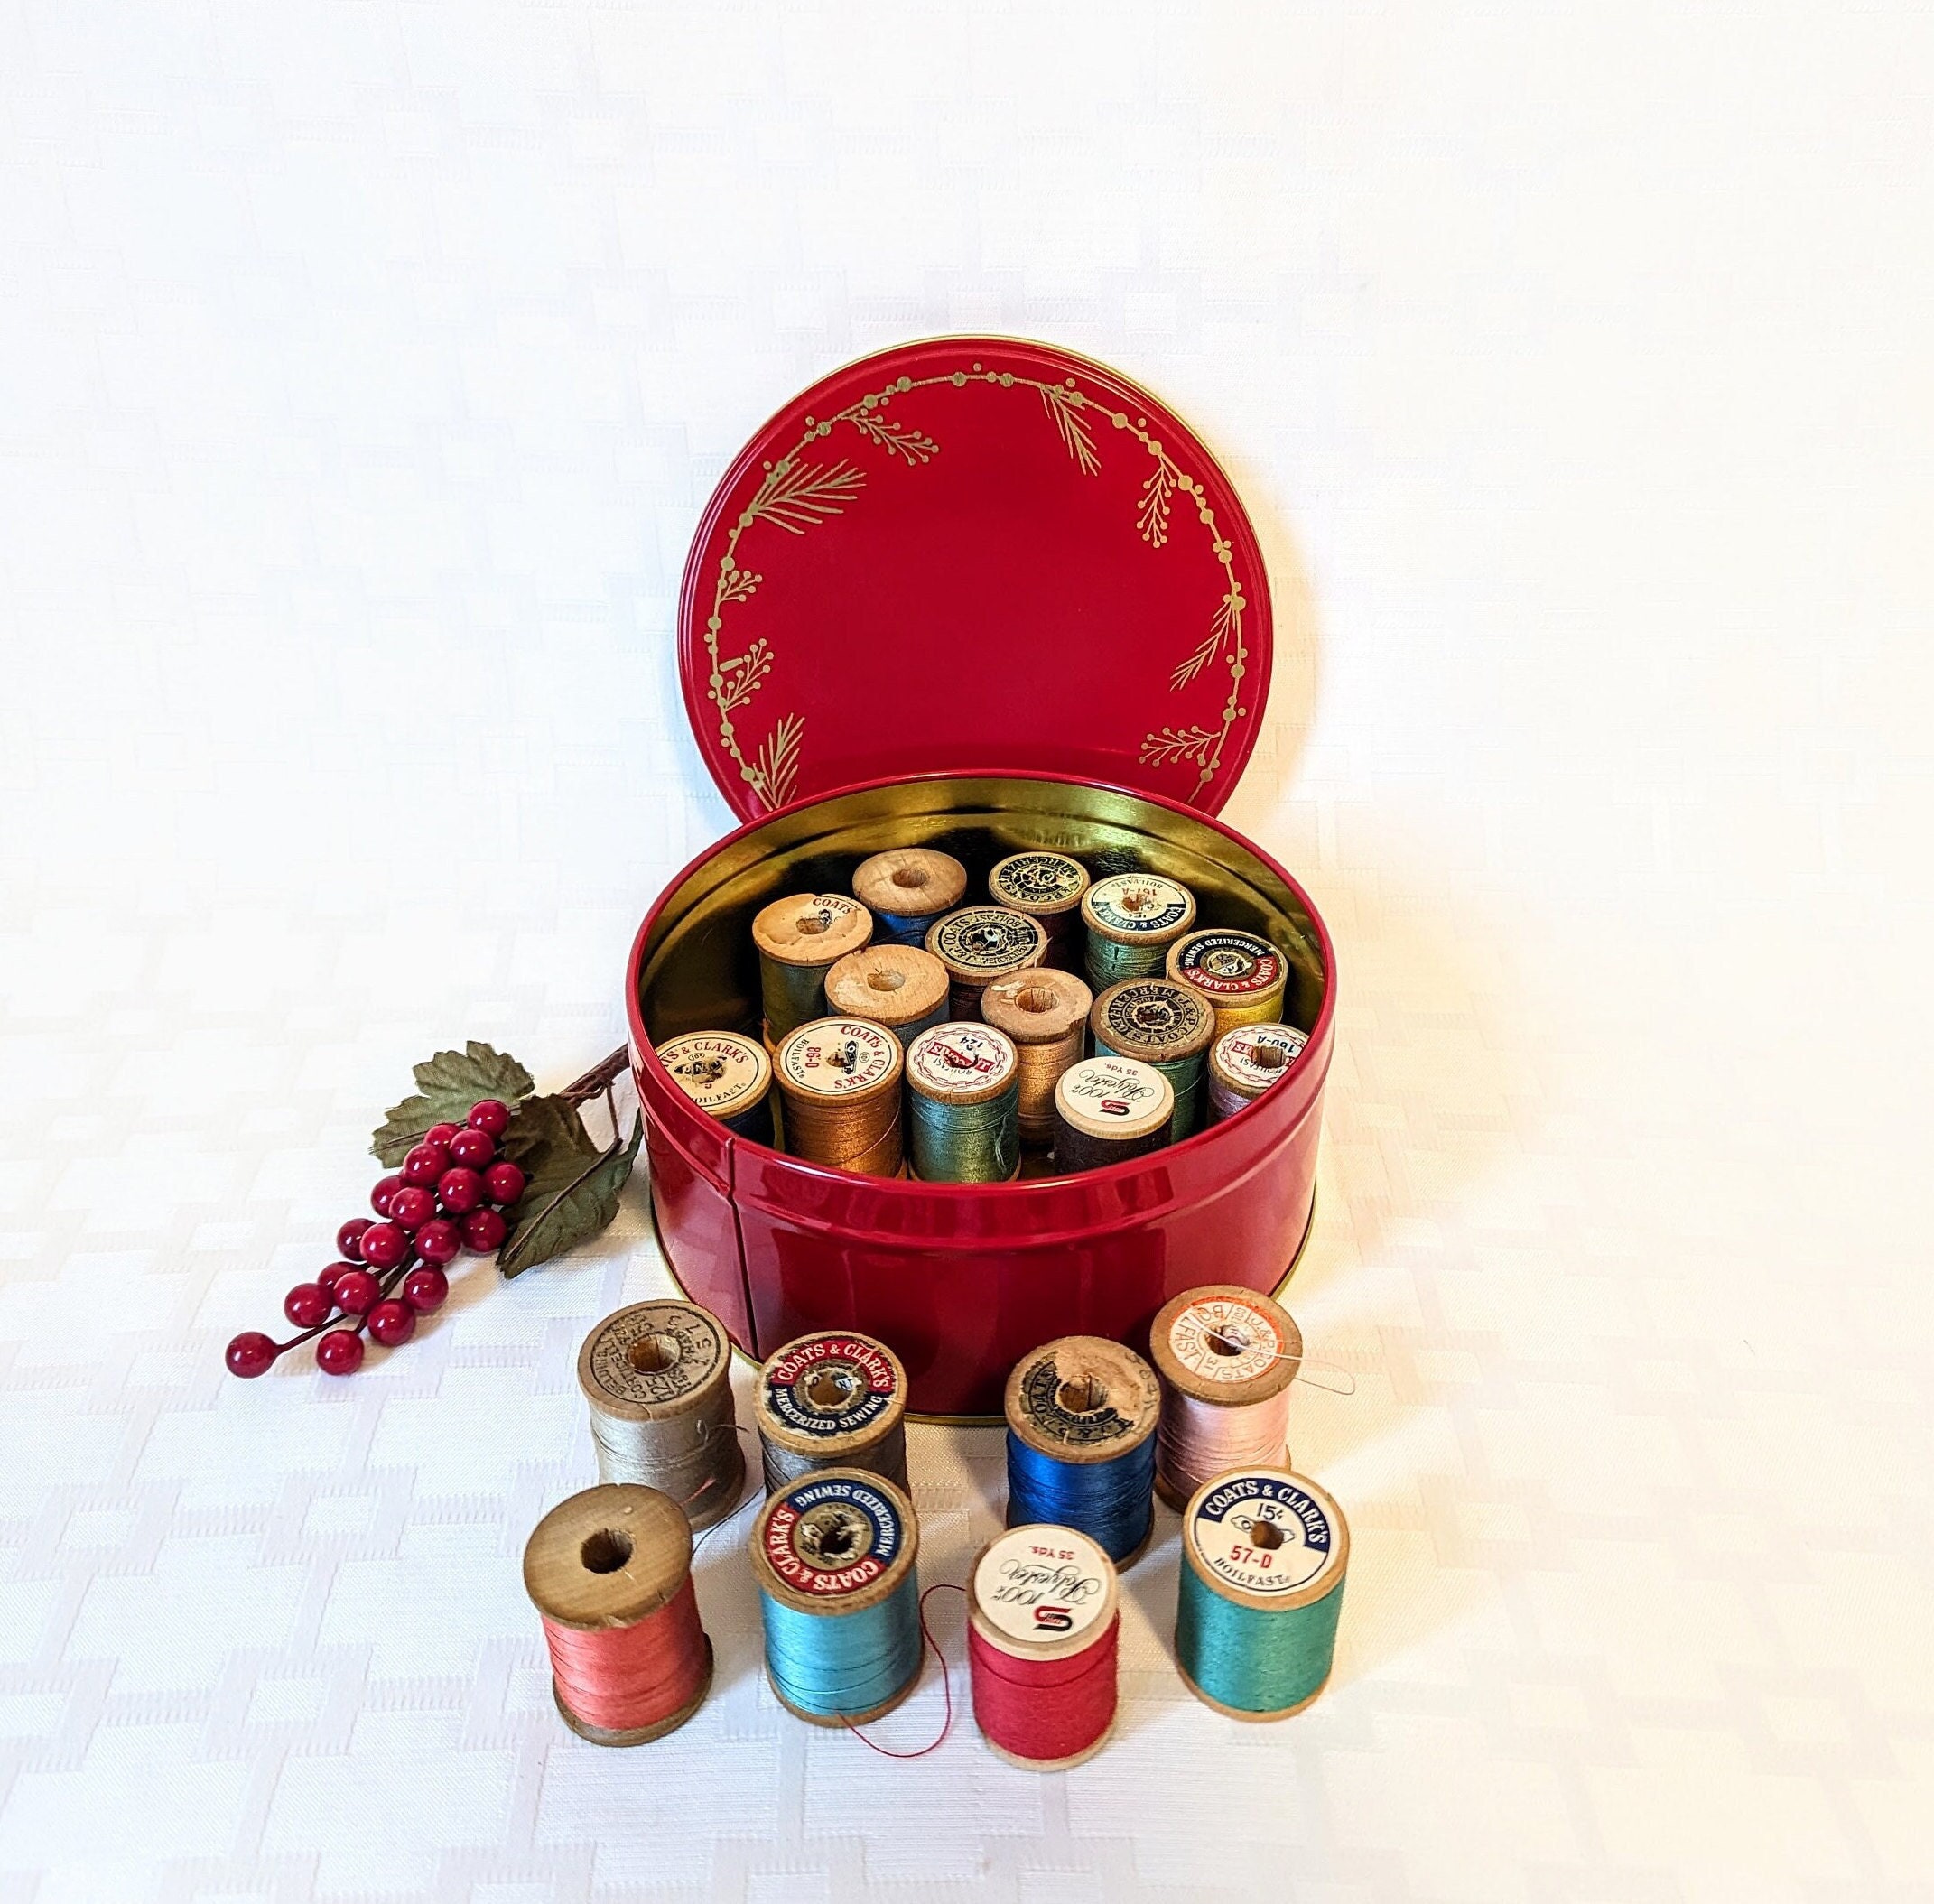 Lot of 22 Vintage Sewing Thread Spools Wood Wooden for Crafting Crafts